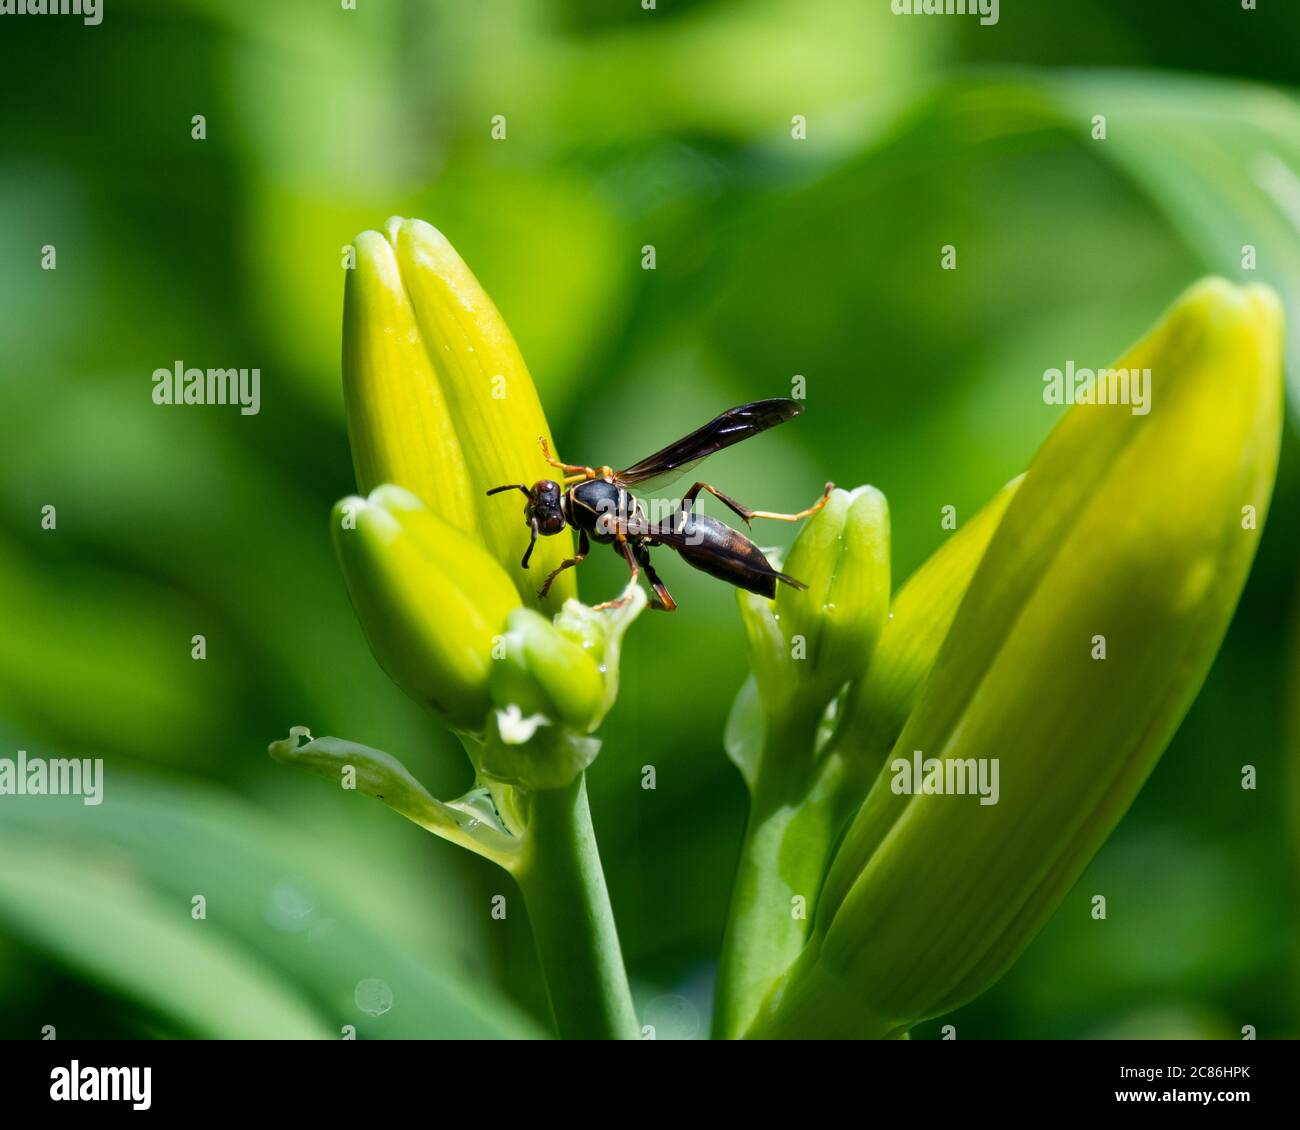 A was, Hymenoptera, feeding on the buds of a day lily plant in a garden. Stock Photo